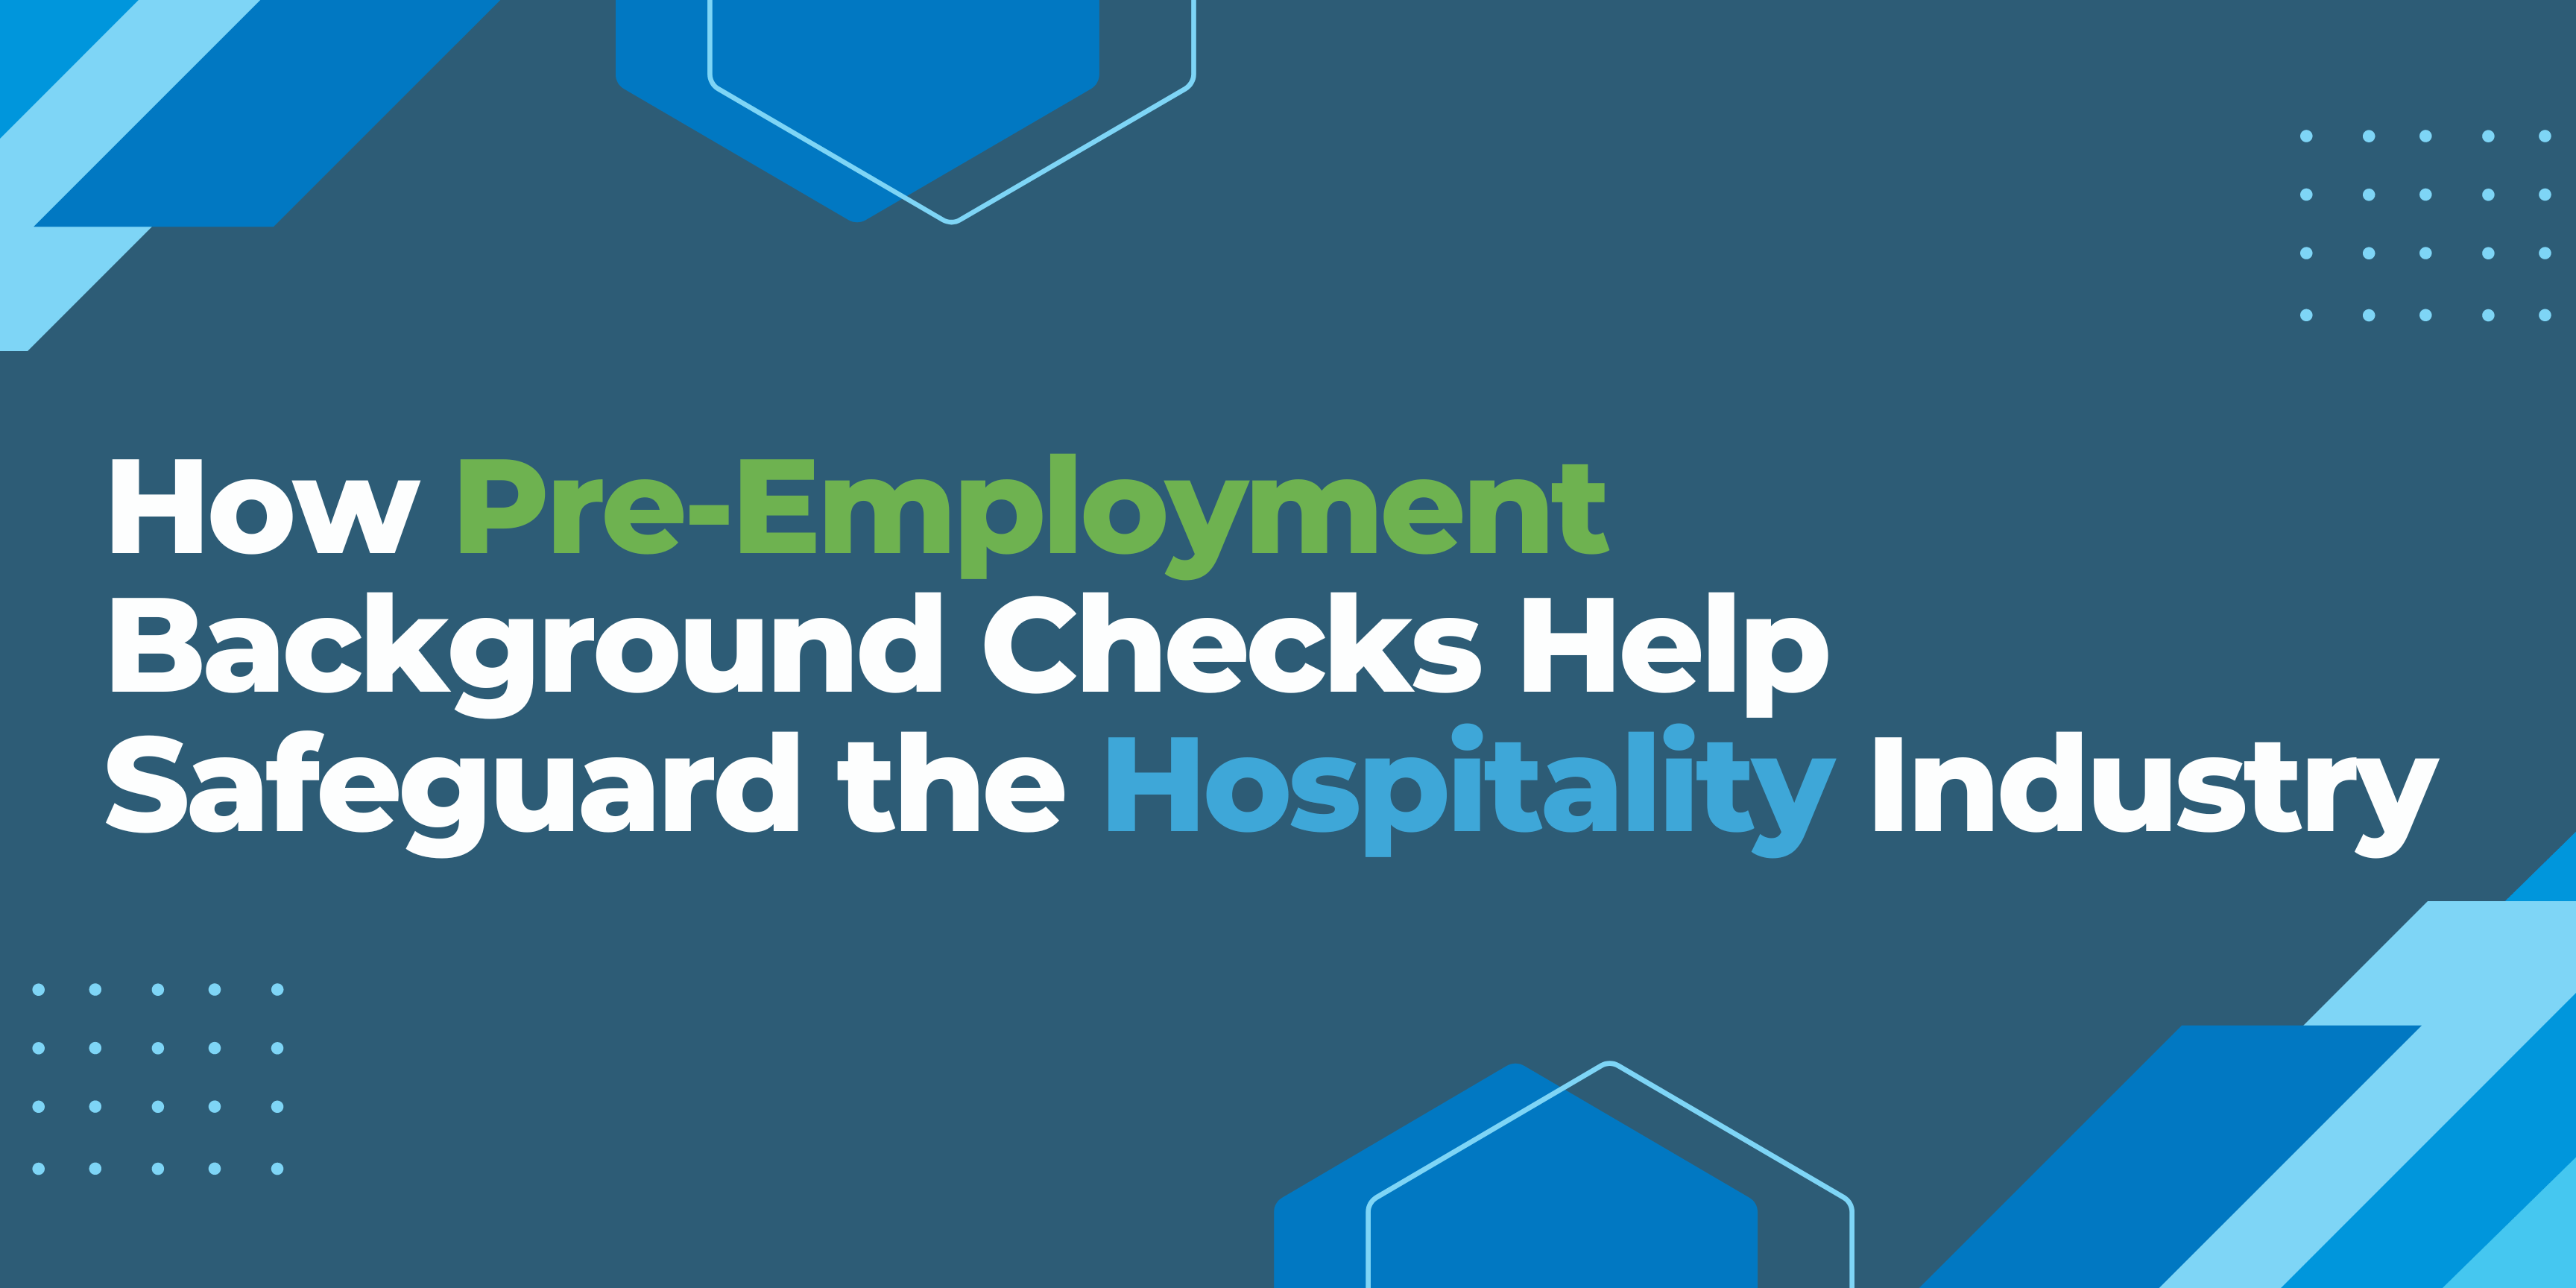 How Pre-Employment Background Checks Help Safeguard the Hospitality Industry